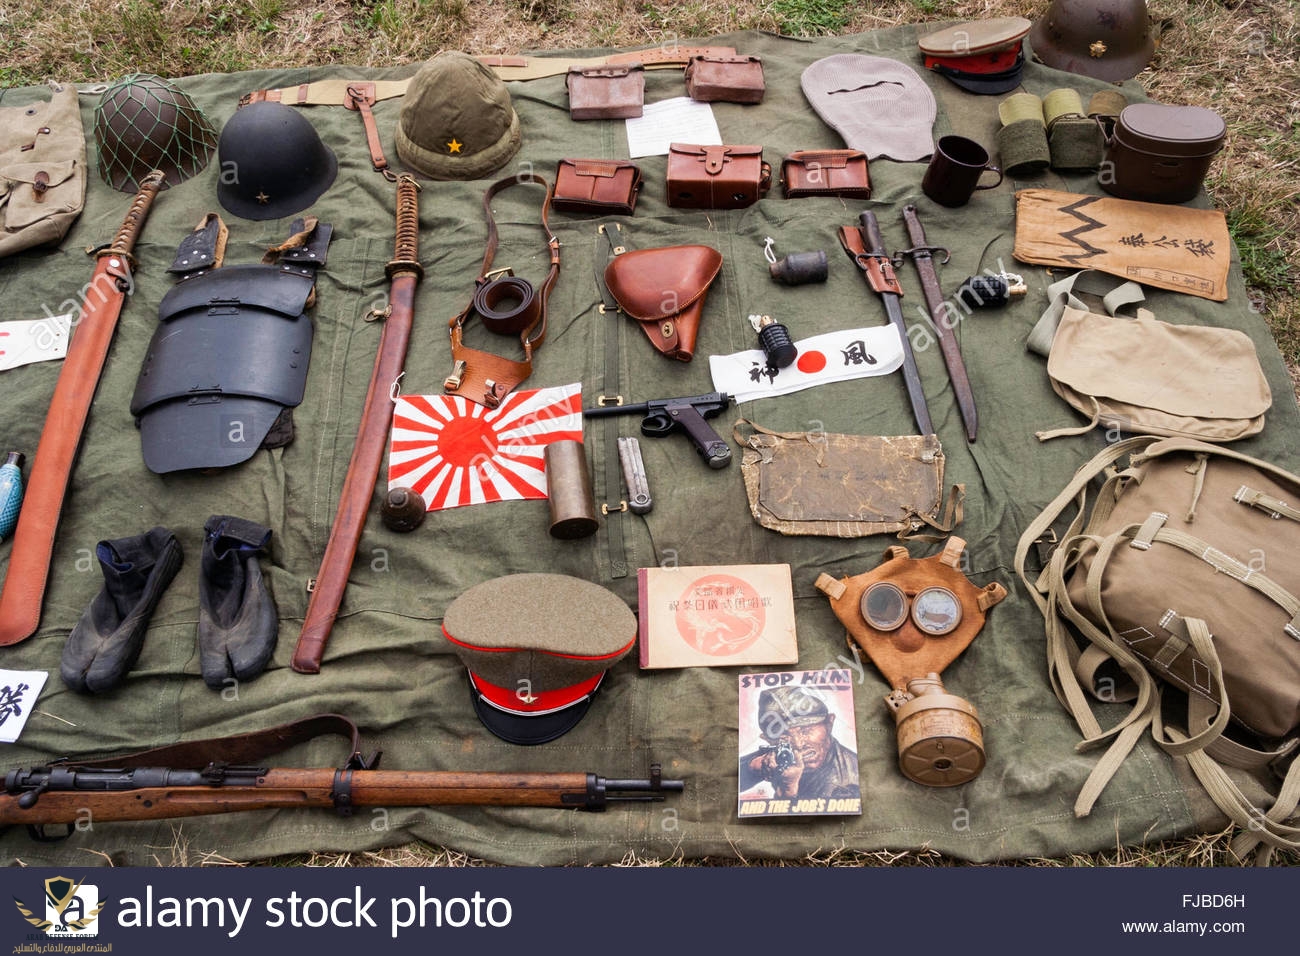 war-and-peace-show-england-display-of-ww2-japanese-imperial-army-equipment-FJBD6H.jpg